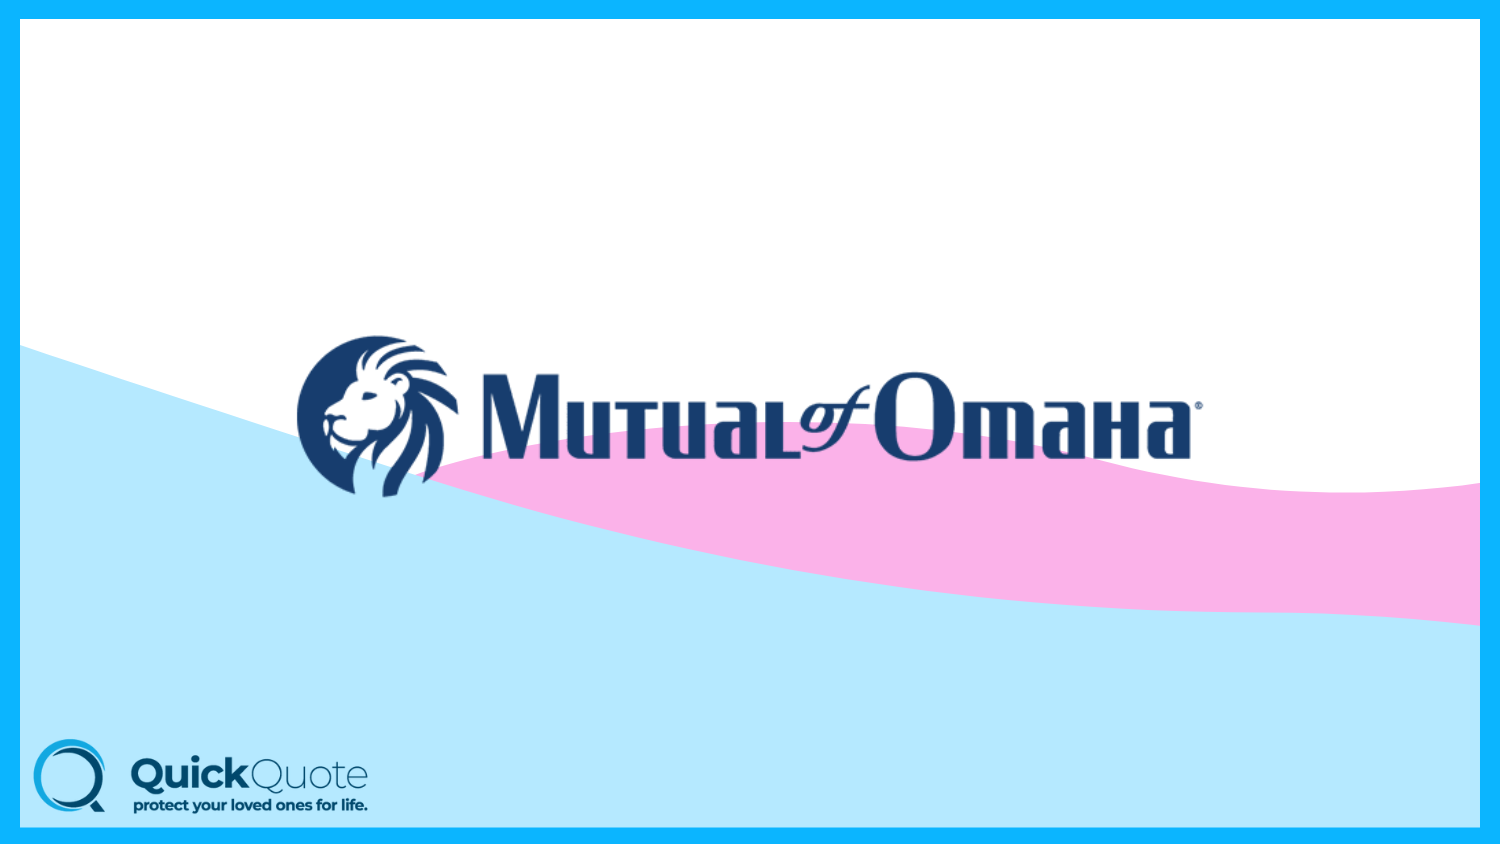 Mutual of Ohama: Best Life Insurance for Nursing Home Residents